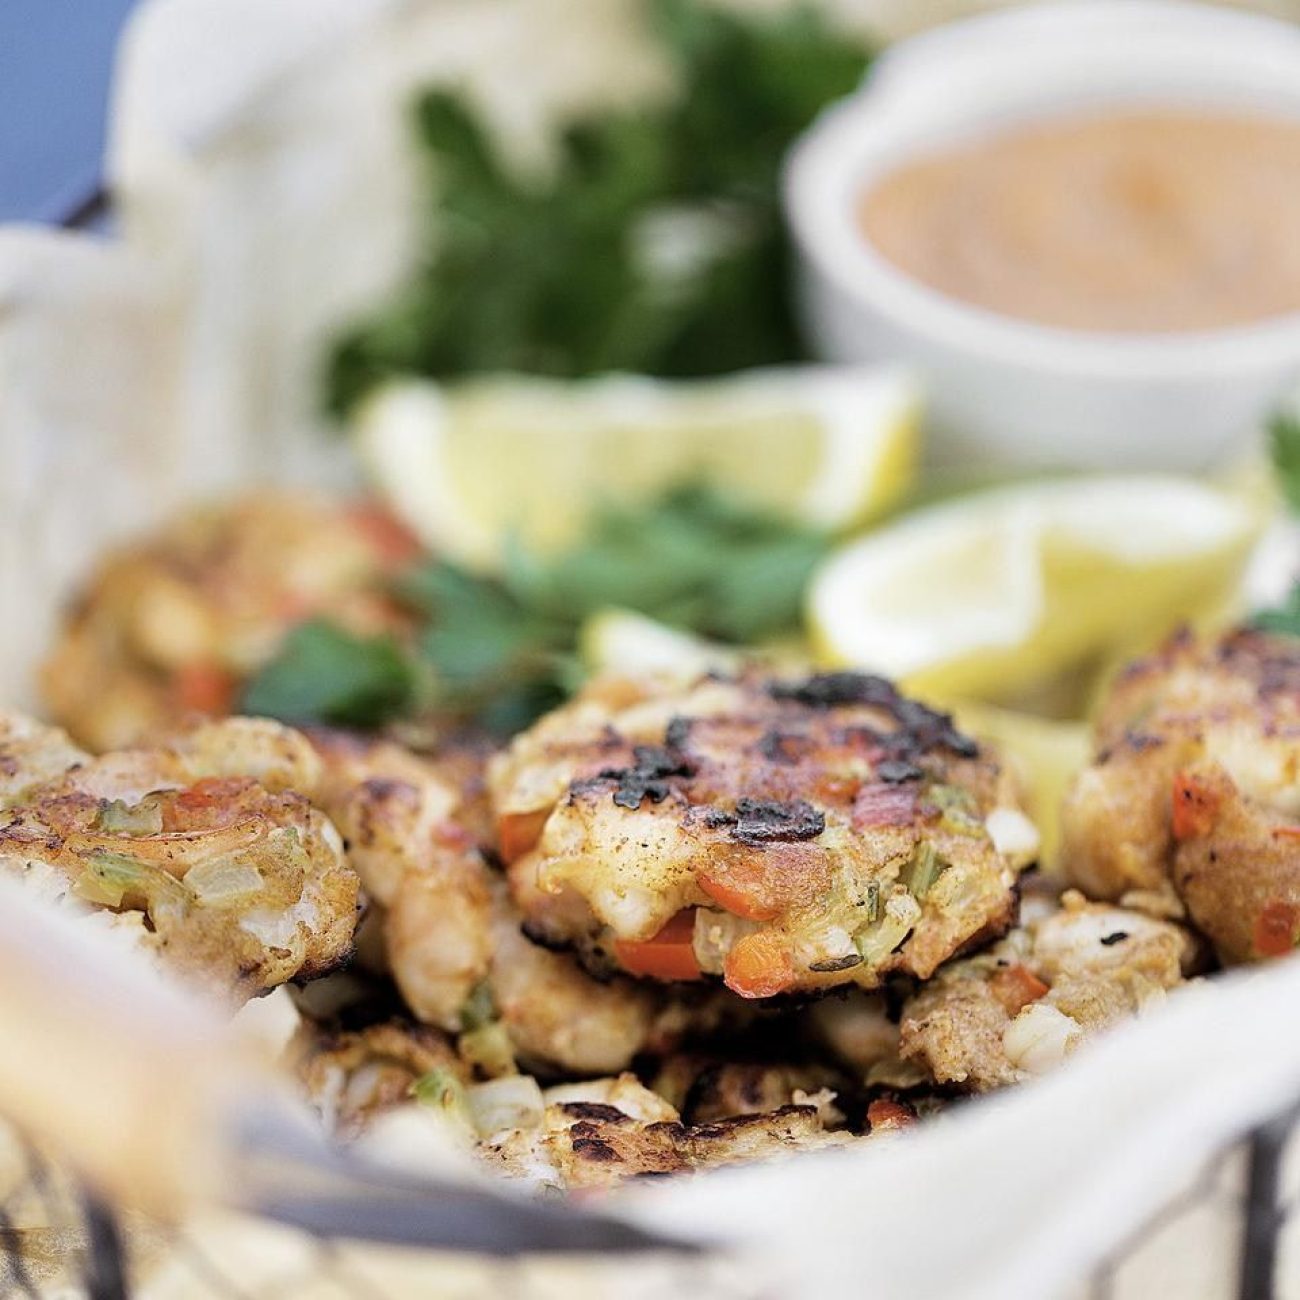 Sizzling Shrimp and Crab Cakes with a Spicy Twist